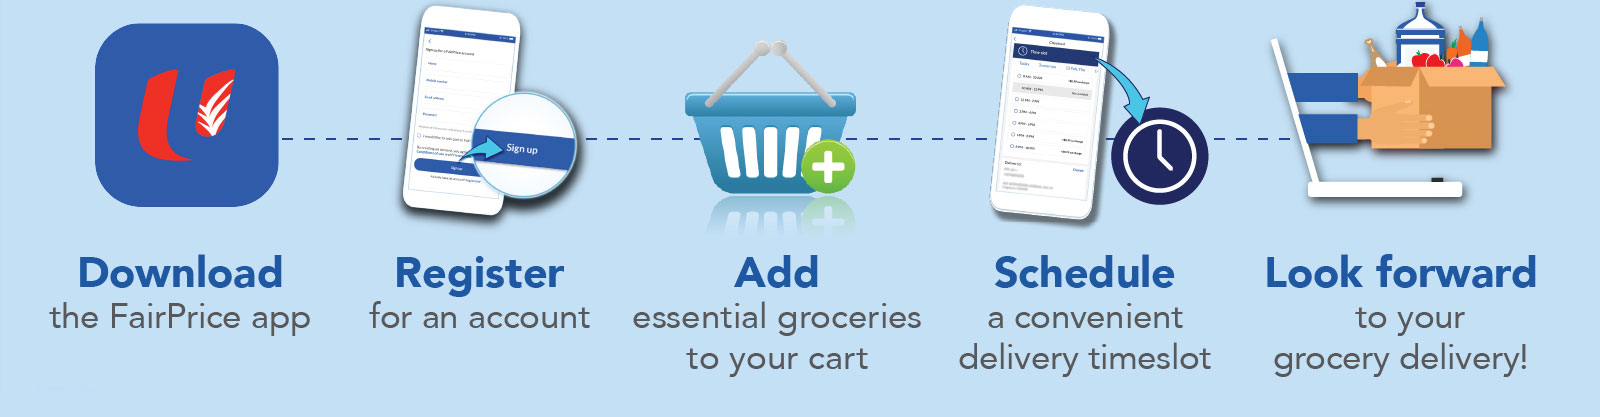 Seniors go digital - Grocery shopping made easy with FairPrice app in 5 easy steps